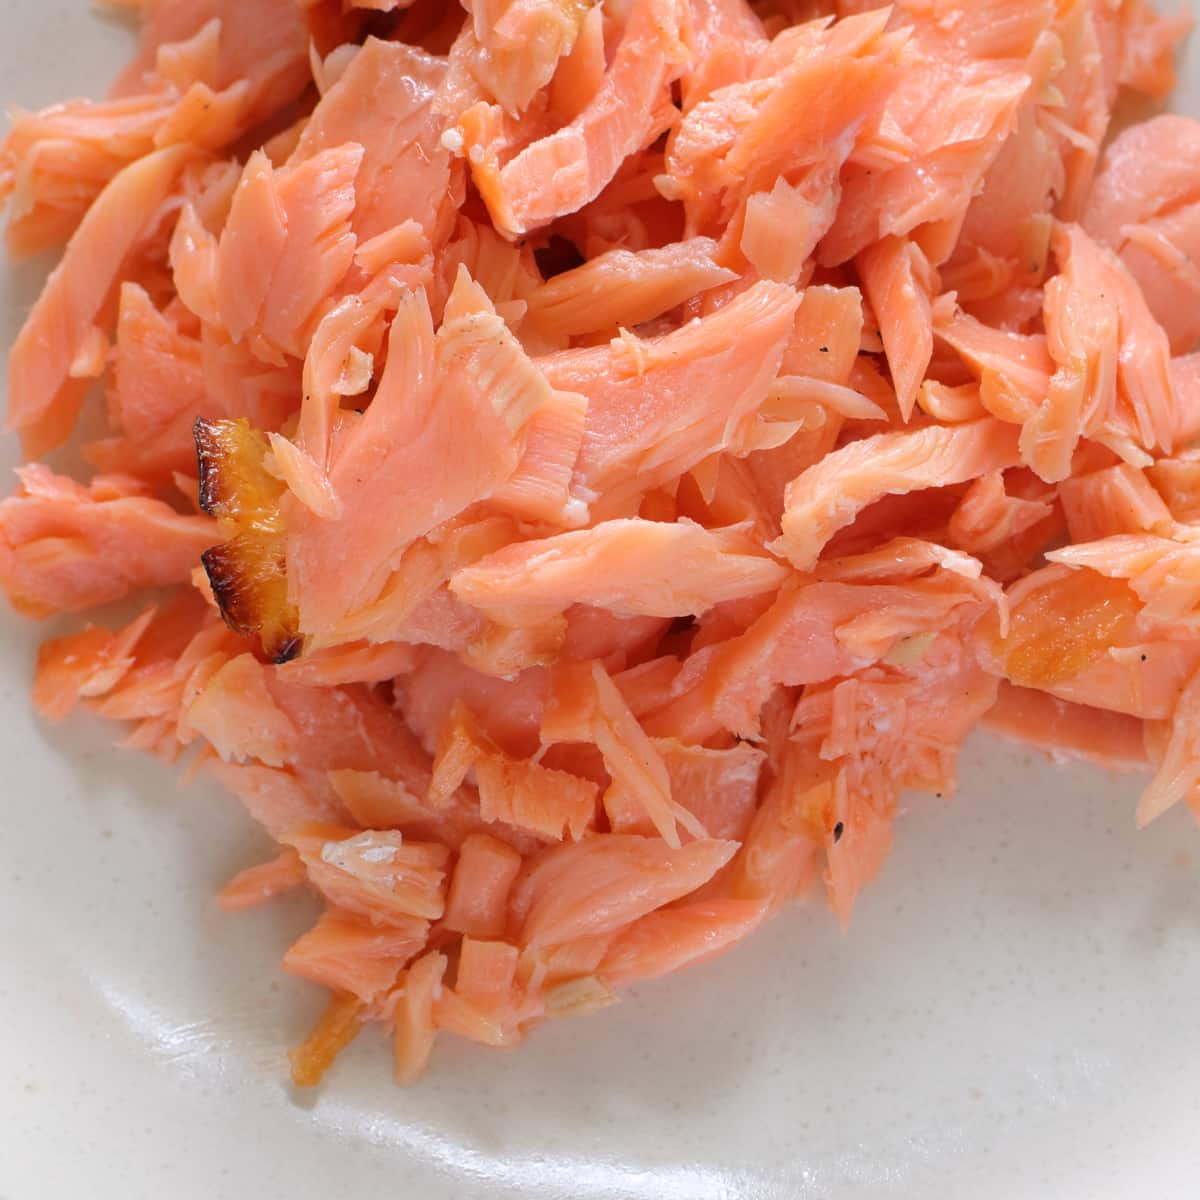 Flaked salmon sits on a white plate.